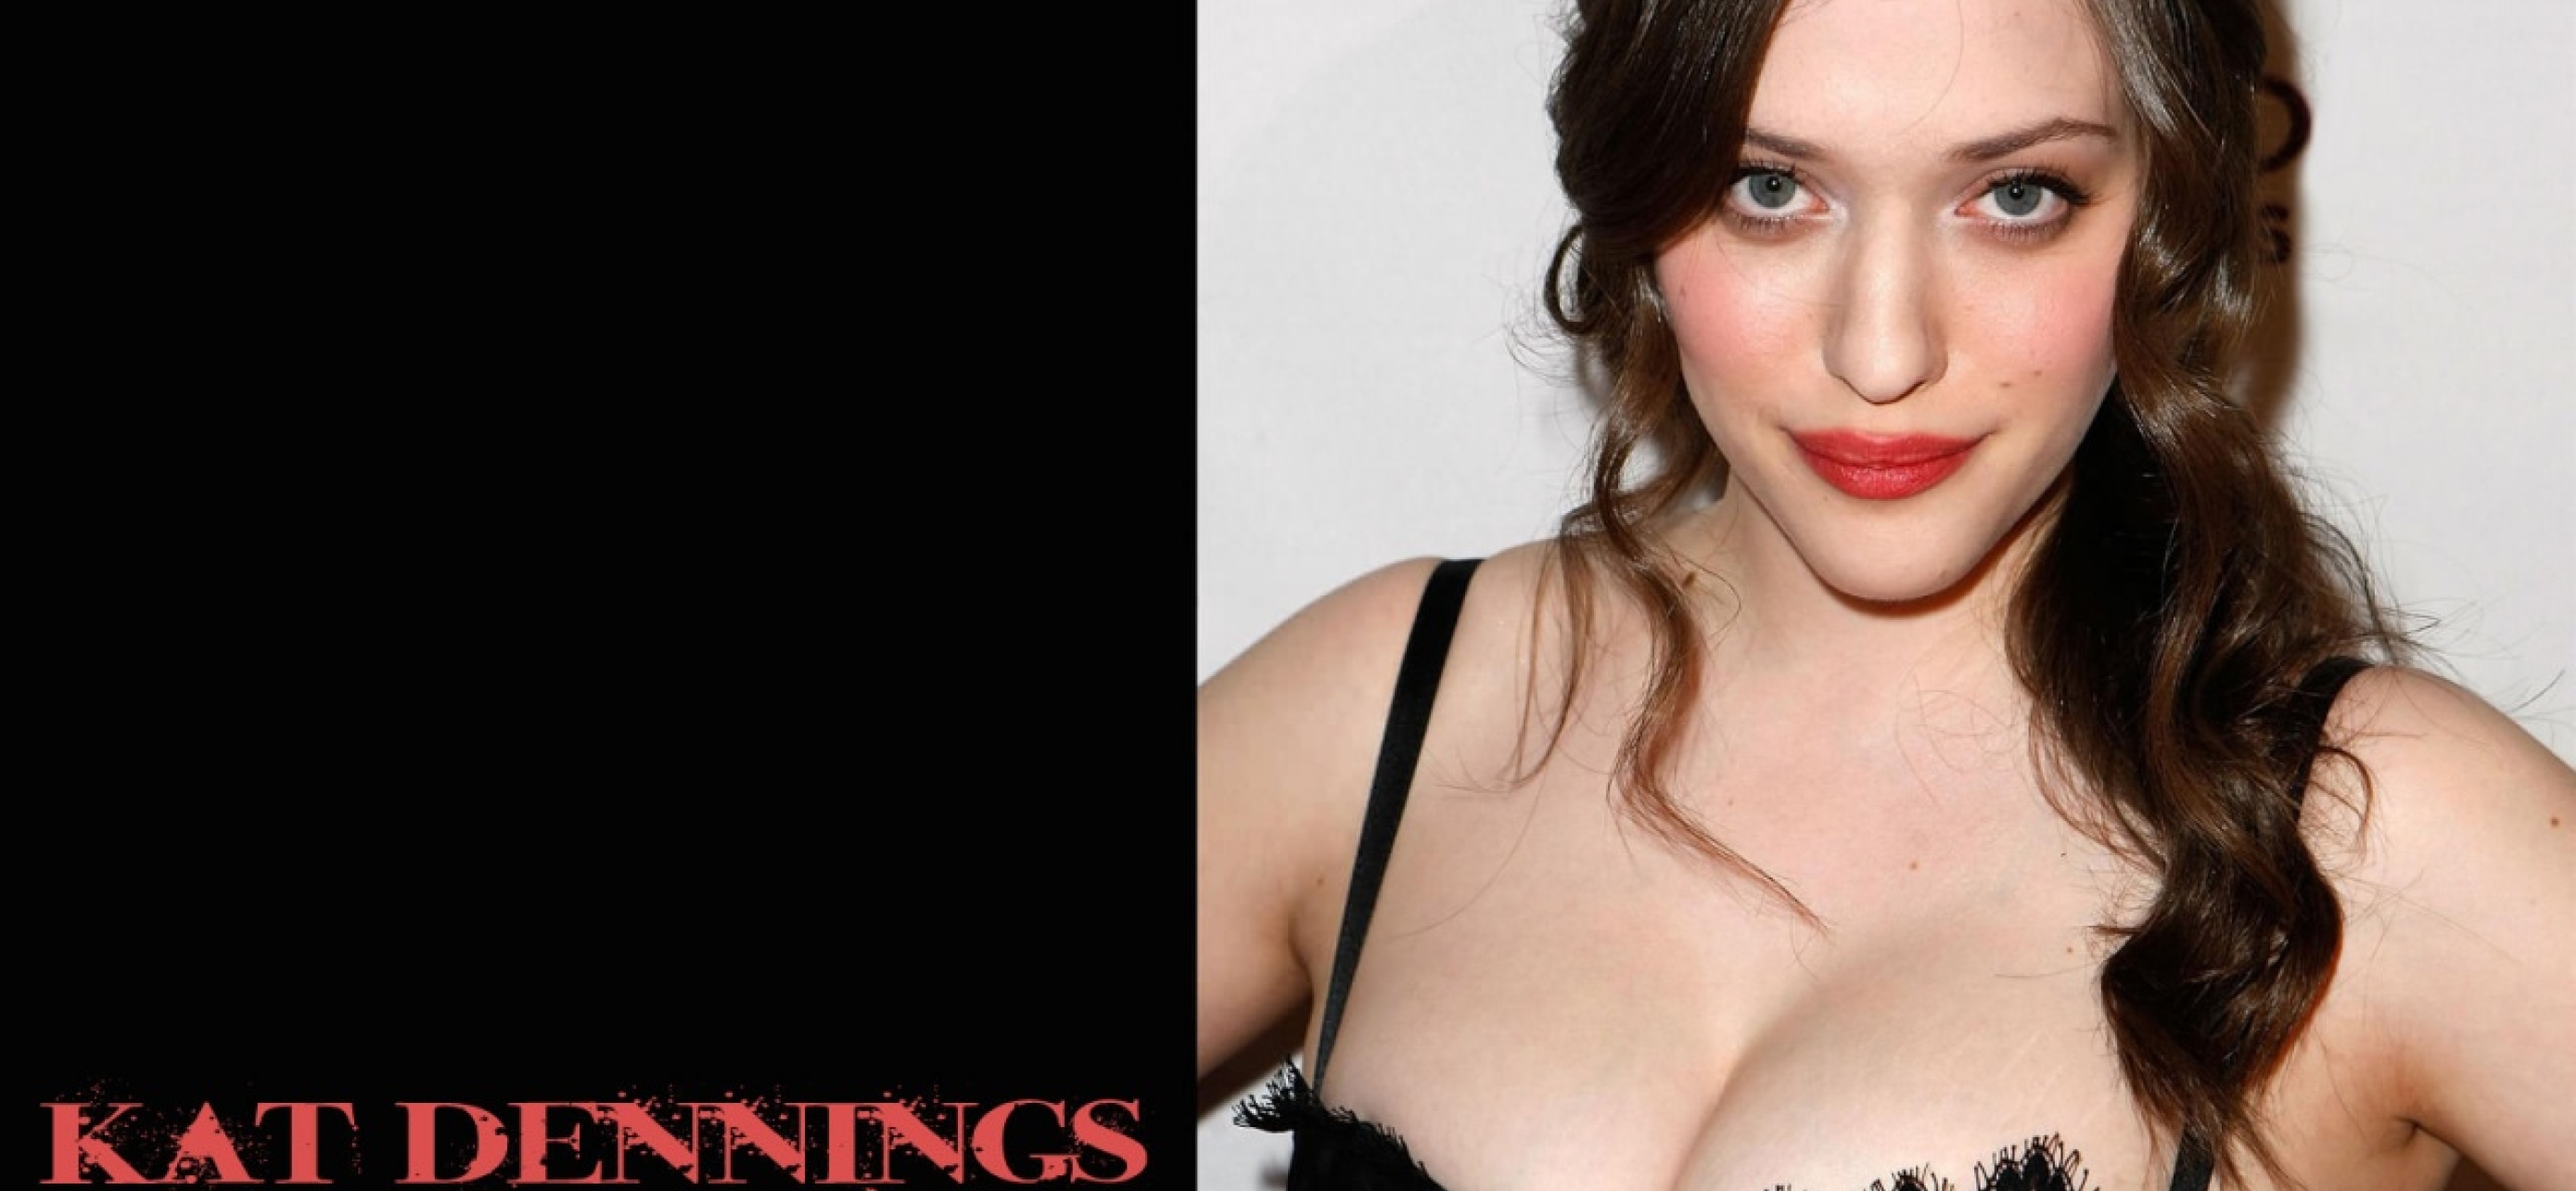 2778x1284 Kat Dennings Big Boobs Images 2778x1284 Resolution Wallpaper, HD  Celebrities 4K Wallpapers, Images, Photos and Background - Wallpapers Den